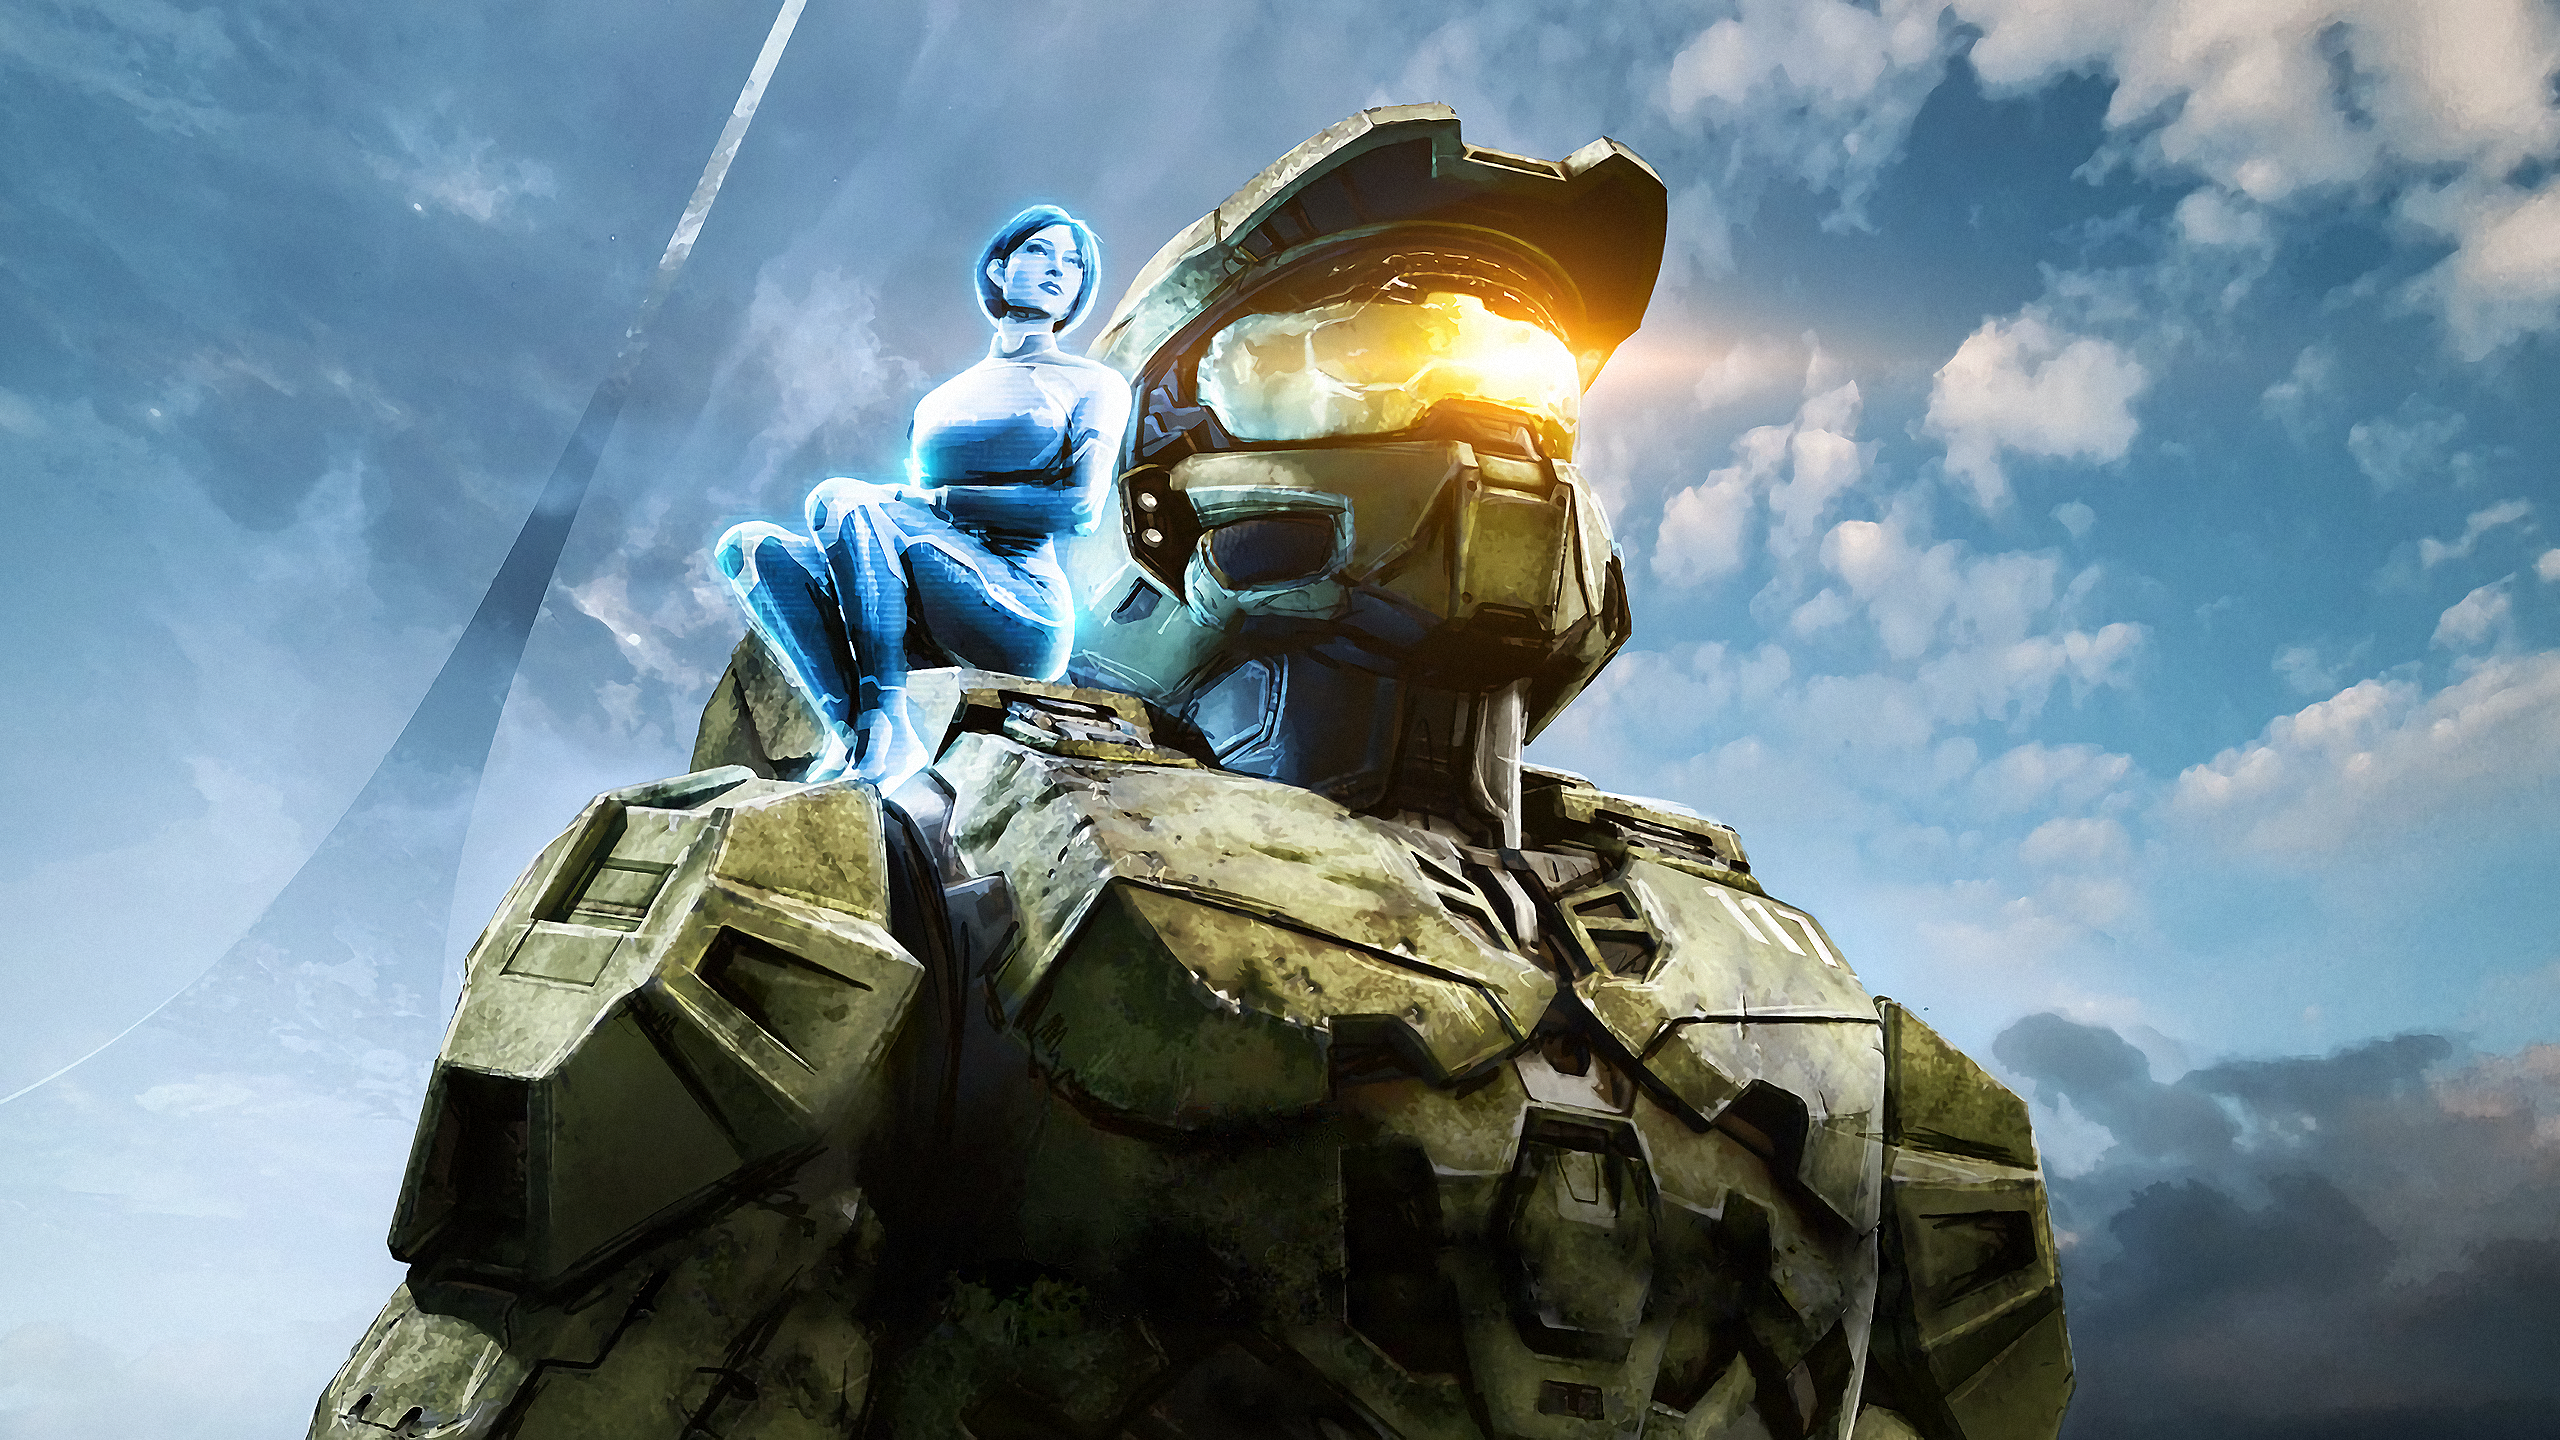 General 2560x1440 Halo Infinite Master Chief (Halo) The Weapon (Halo) Halo (game) Zeta Halo 117 video games video game characters